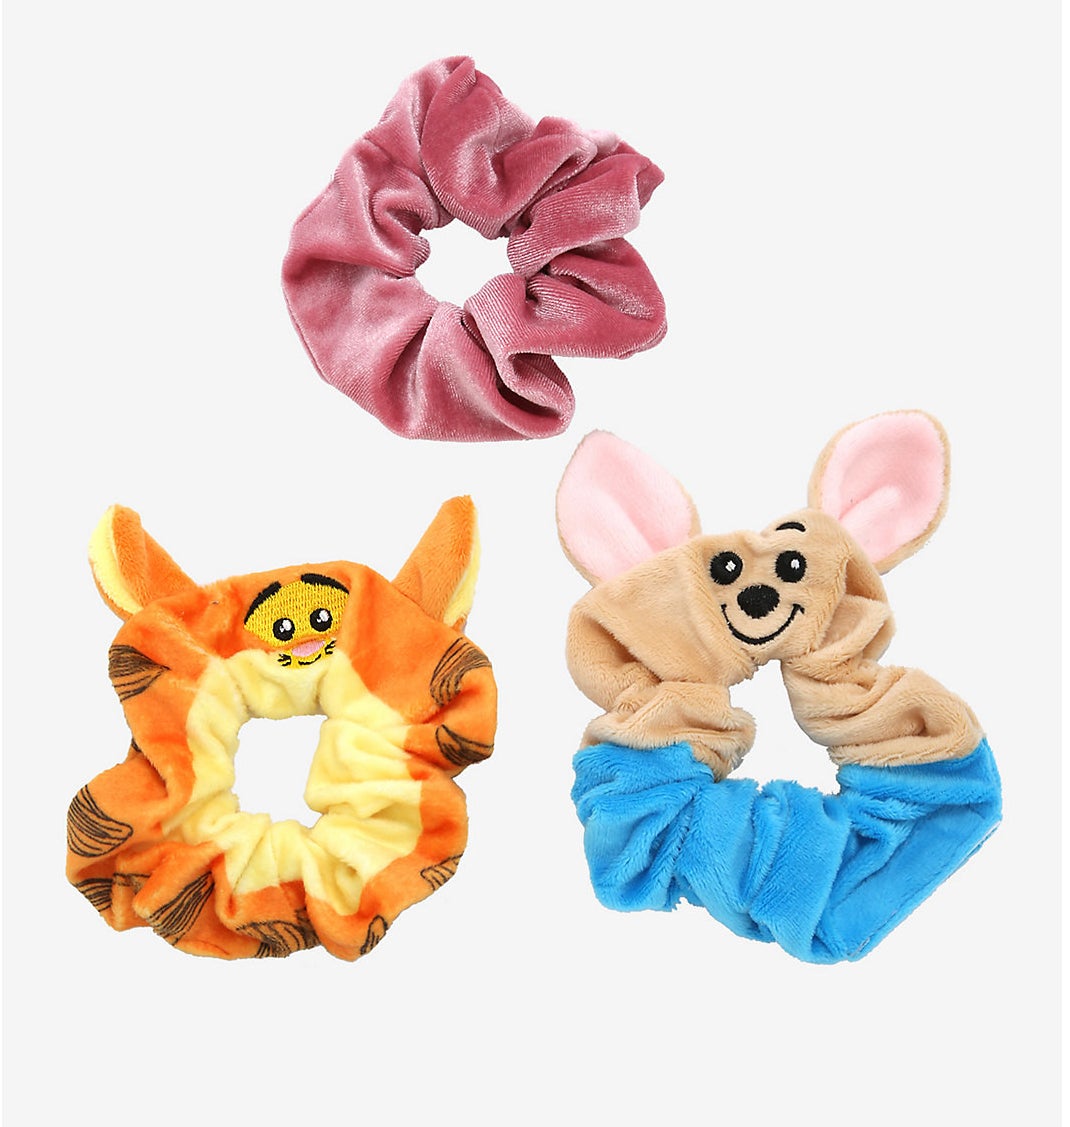 plush scrunchies, one plain pink, one shaped like Tigger and one shaped like Roo, both with ears